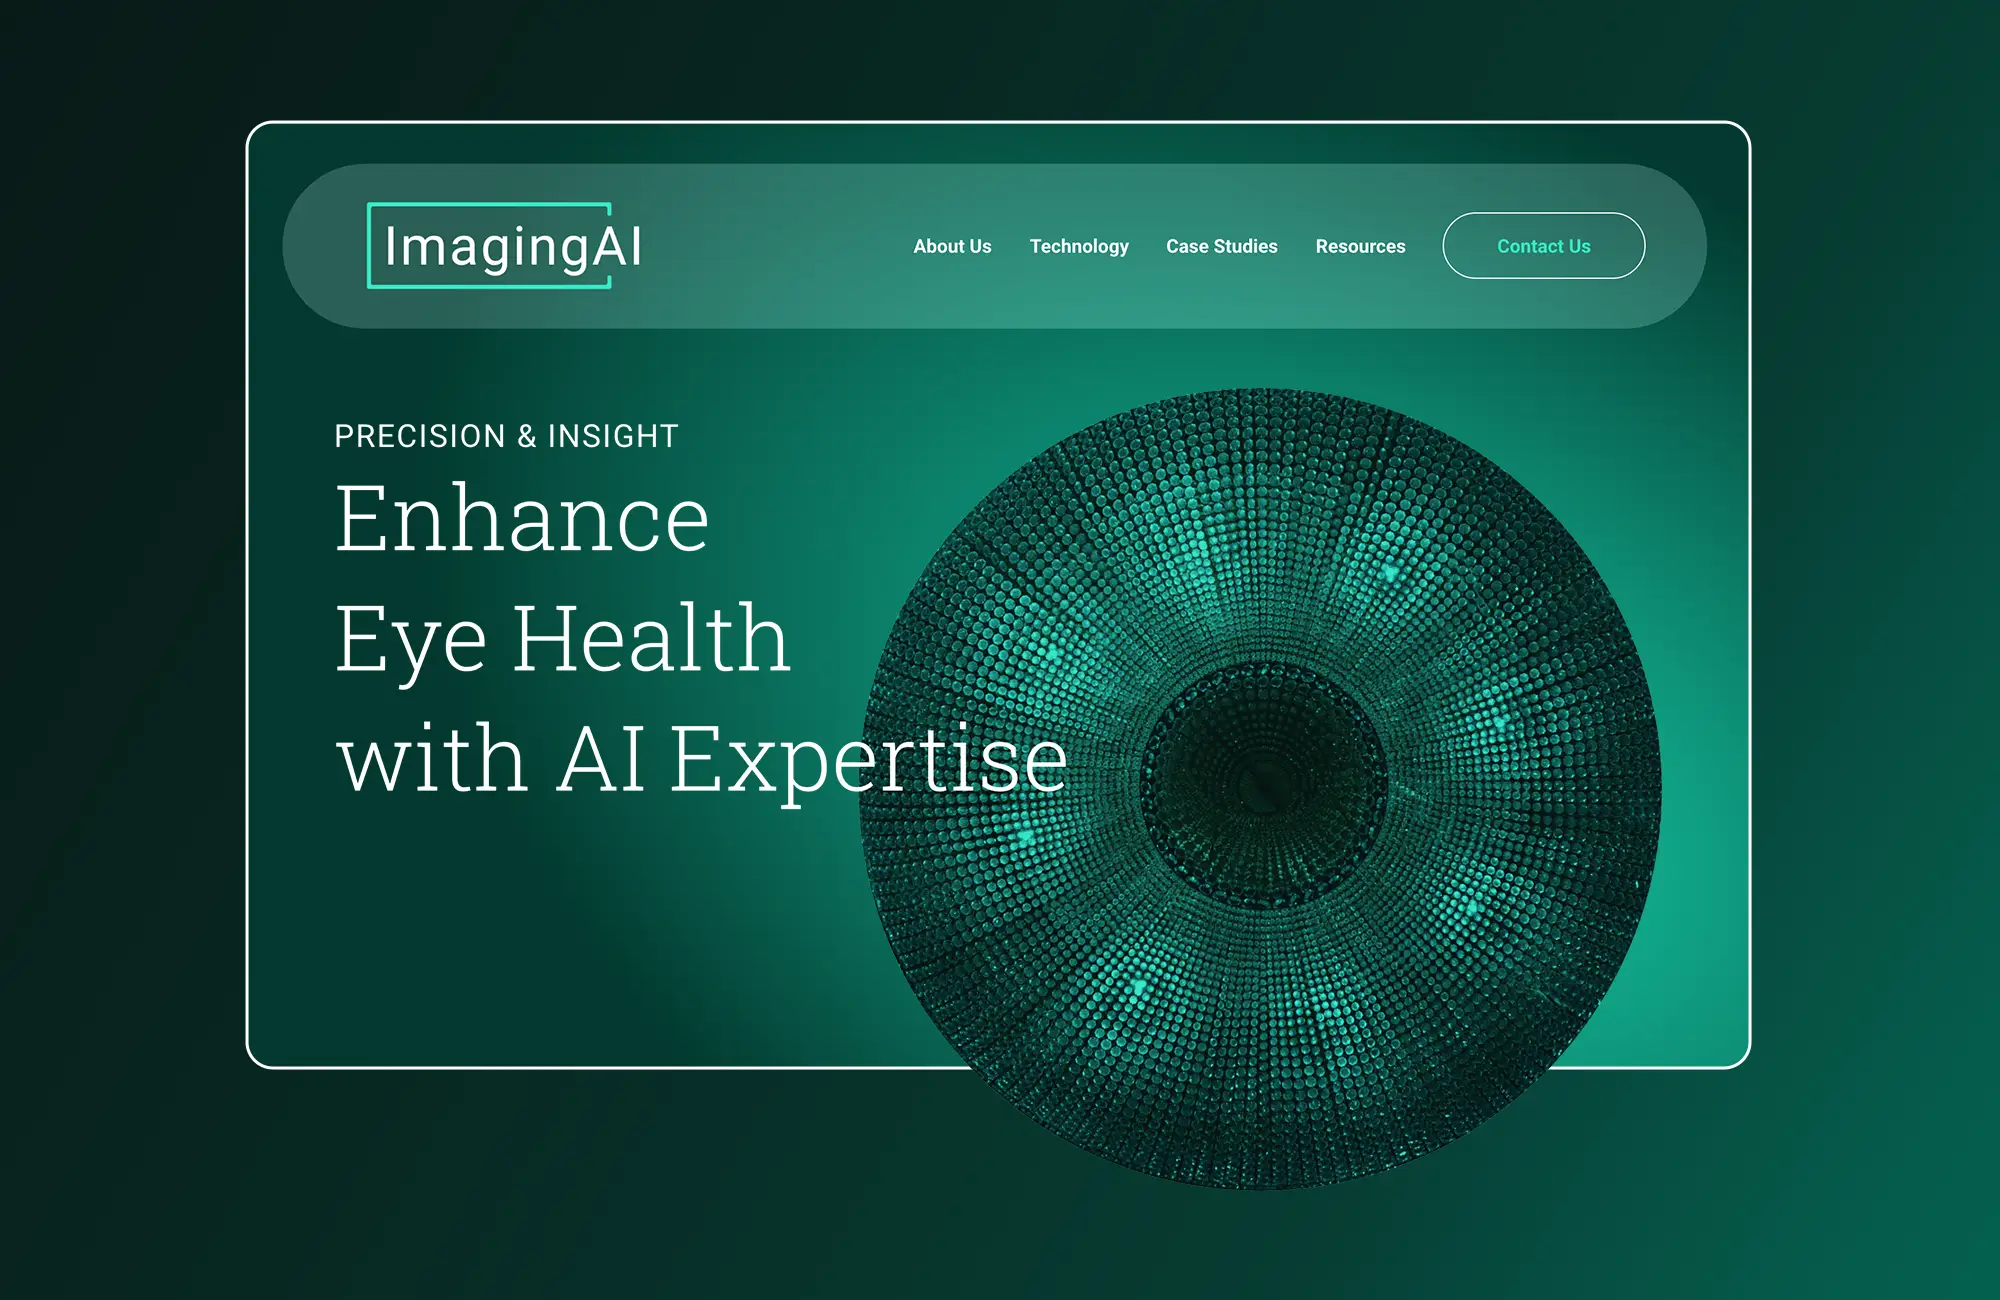 Home page design with heading for an eye care artificial intelligence company.